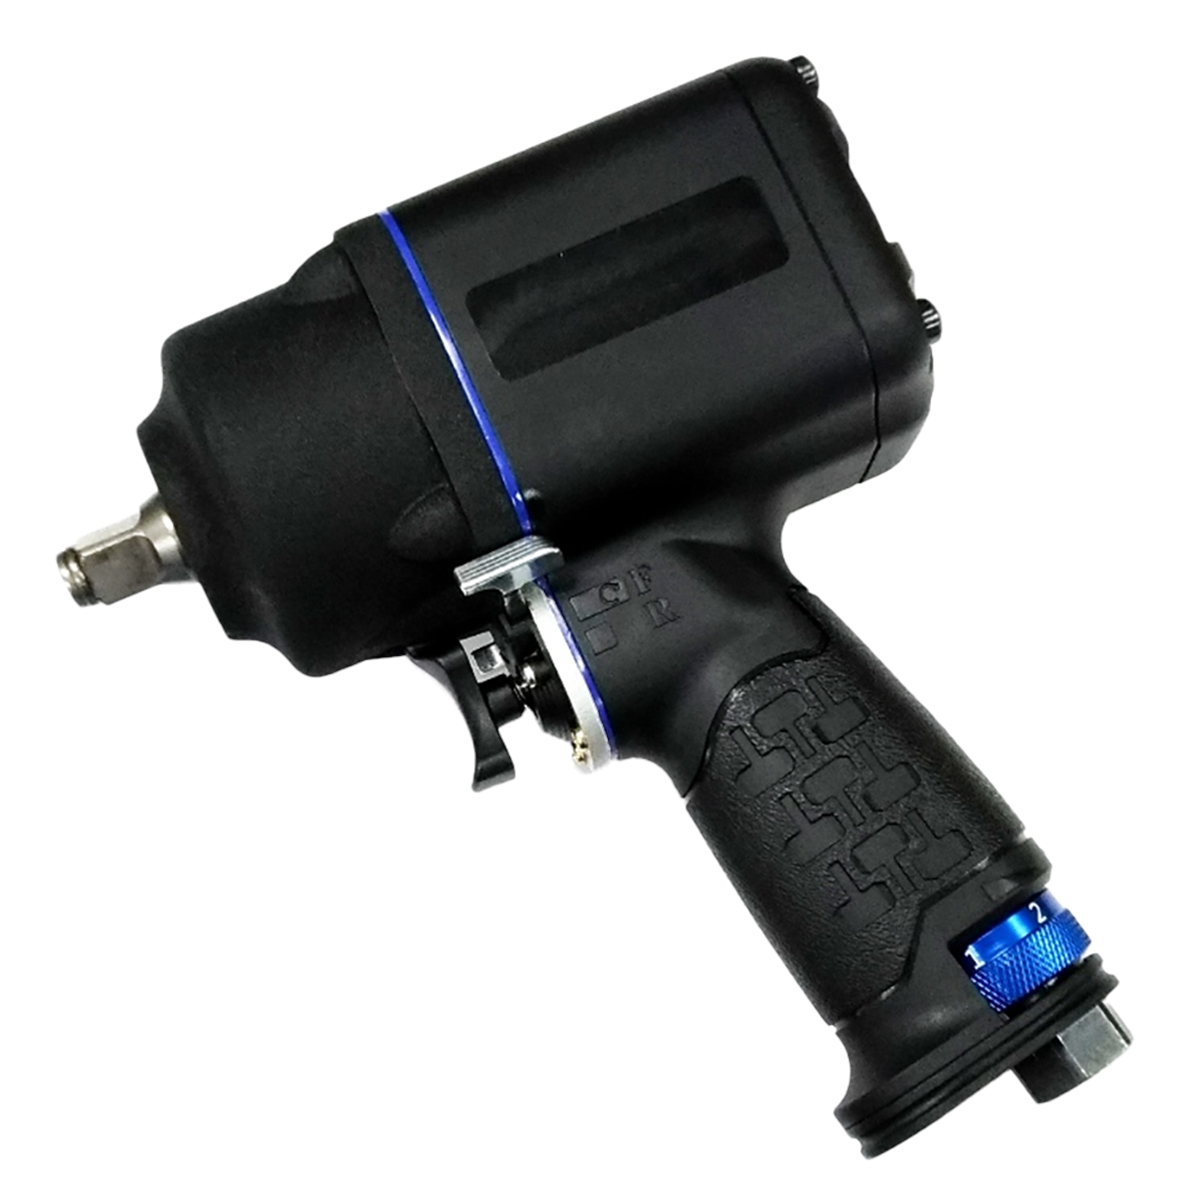 Picture of Astro Pneumatic AST1895 ONYX 0.5 in. THOR G2 Impact Wrench